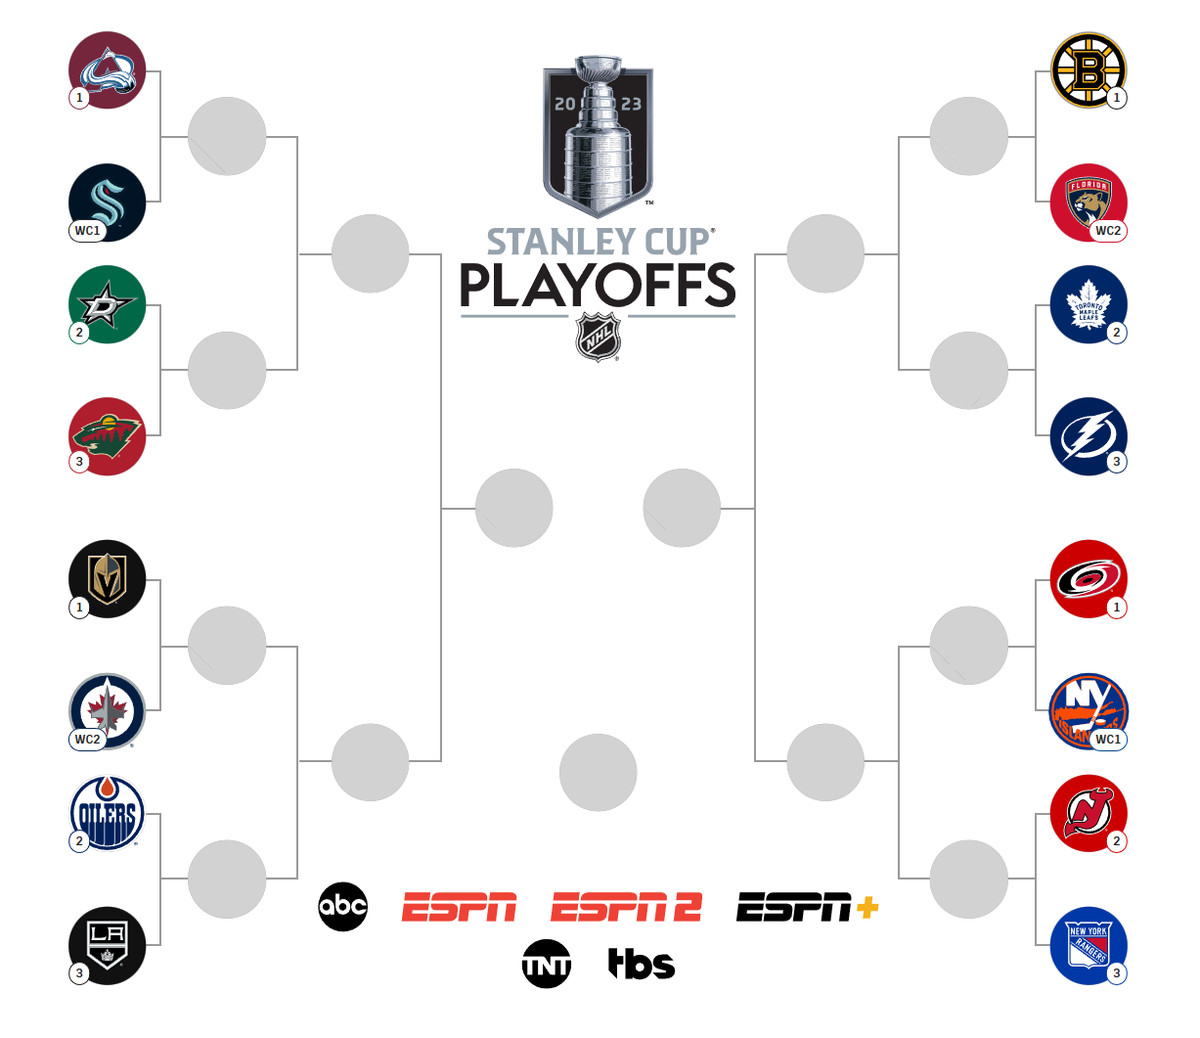 Playoffs start tonight!
Who are your final 4? Winner?
Prizes to anyone who can get it right! 
We may have some merch on the way 😀

We're still building here. We didn't want to rush a launch, BUT...
Be prepared for the start of the 23/24 NHL Season!
#NHL #HockeyNFT #Playoffs